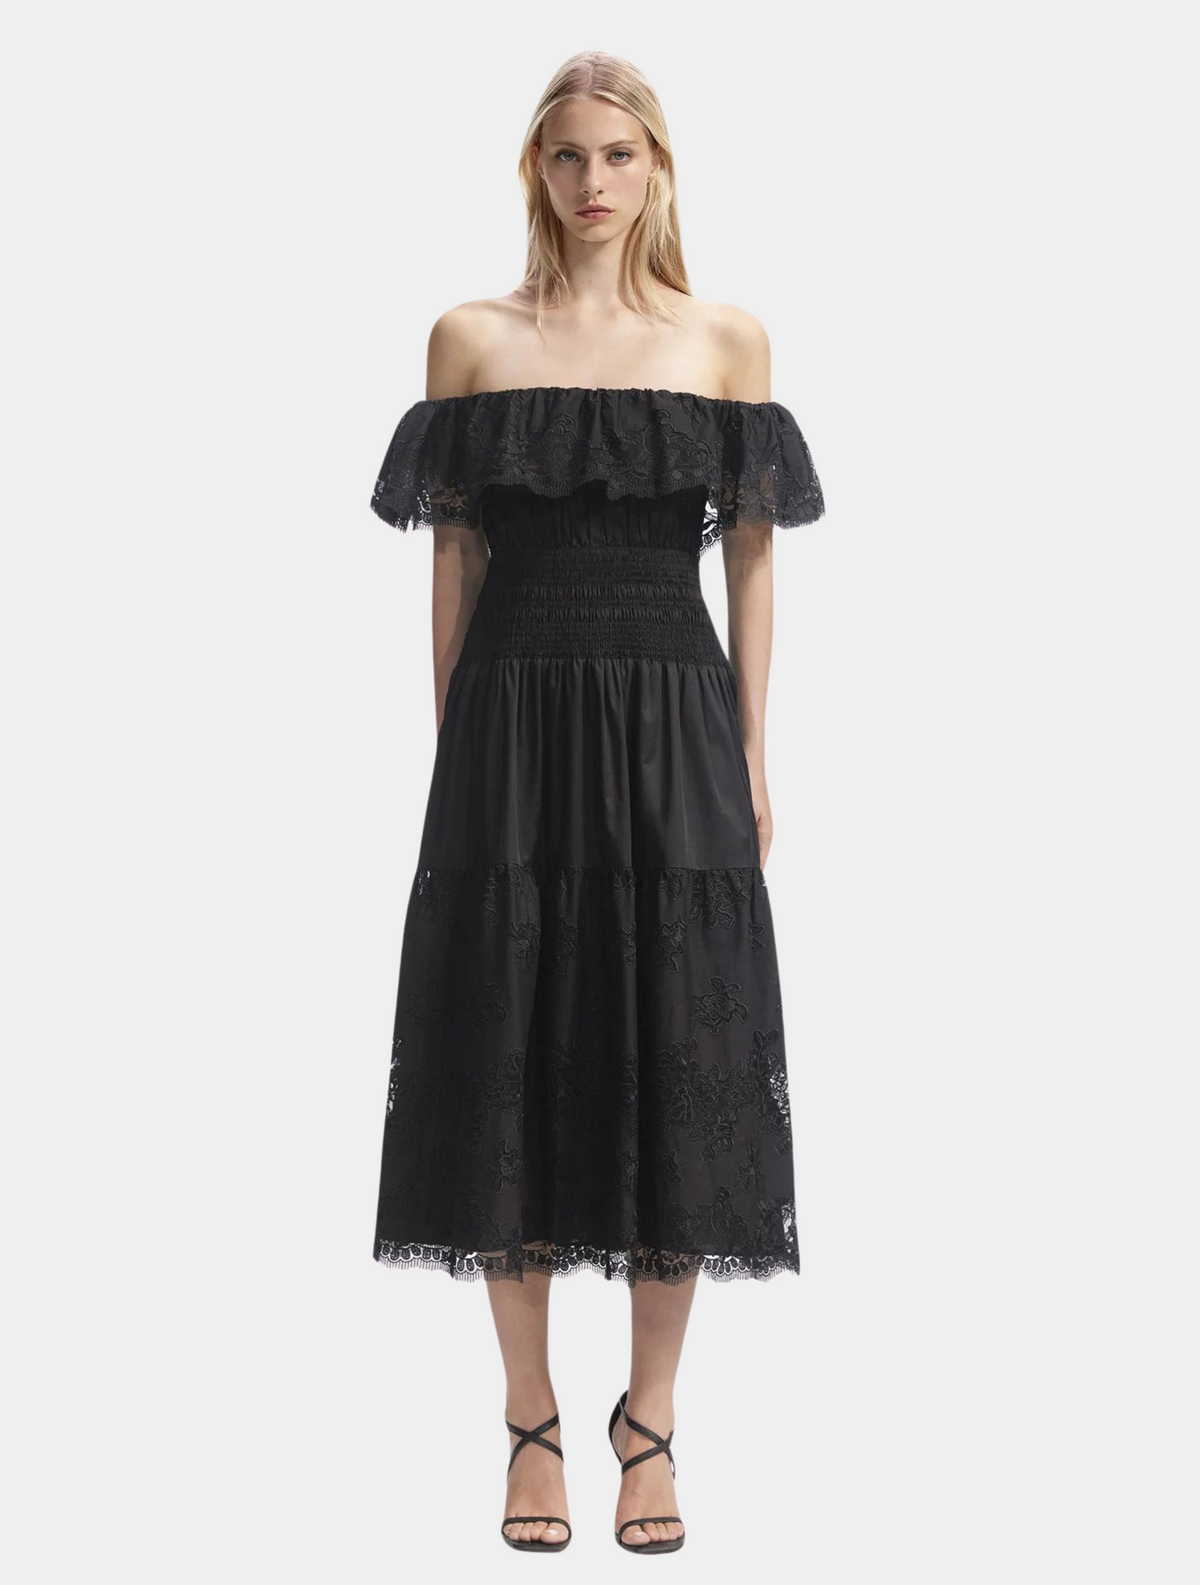 Off the shoulder cotton black dress with lace around the bodice and lace trim with elasticated and ruched waistline